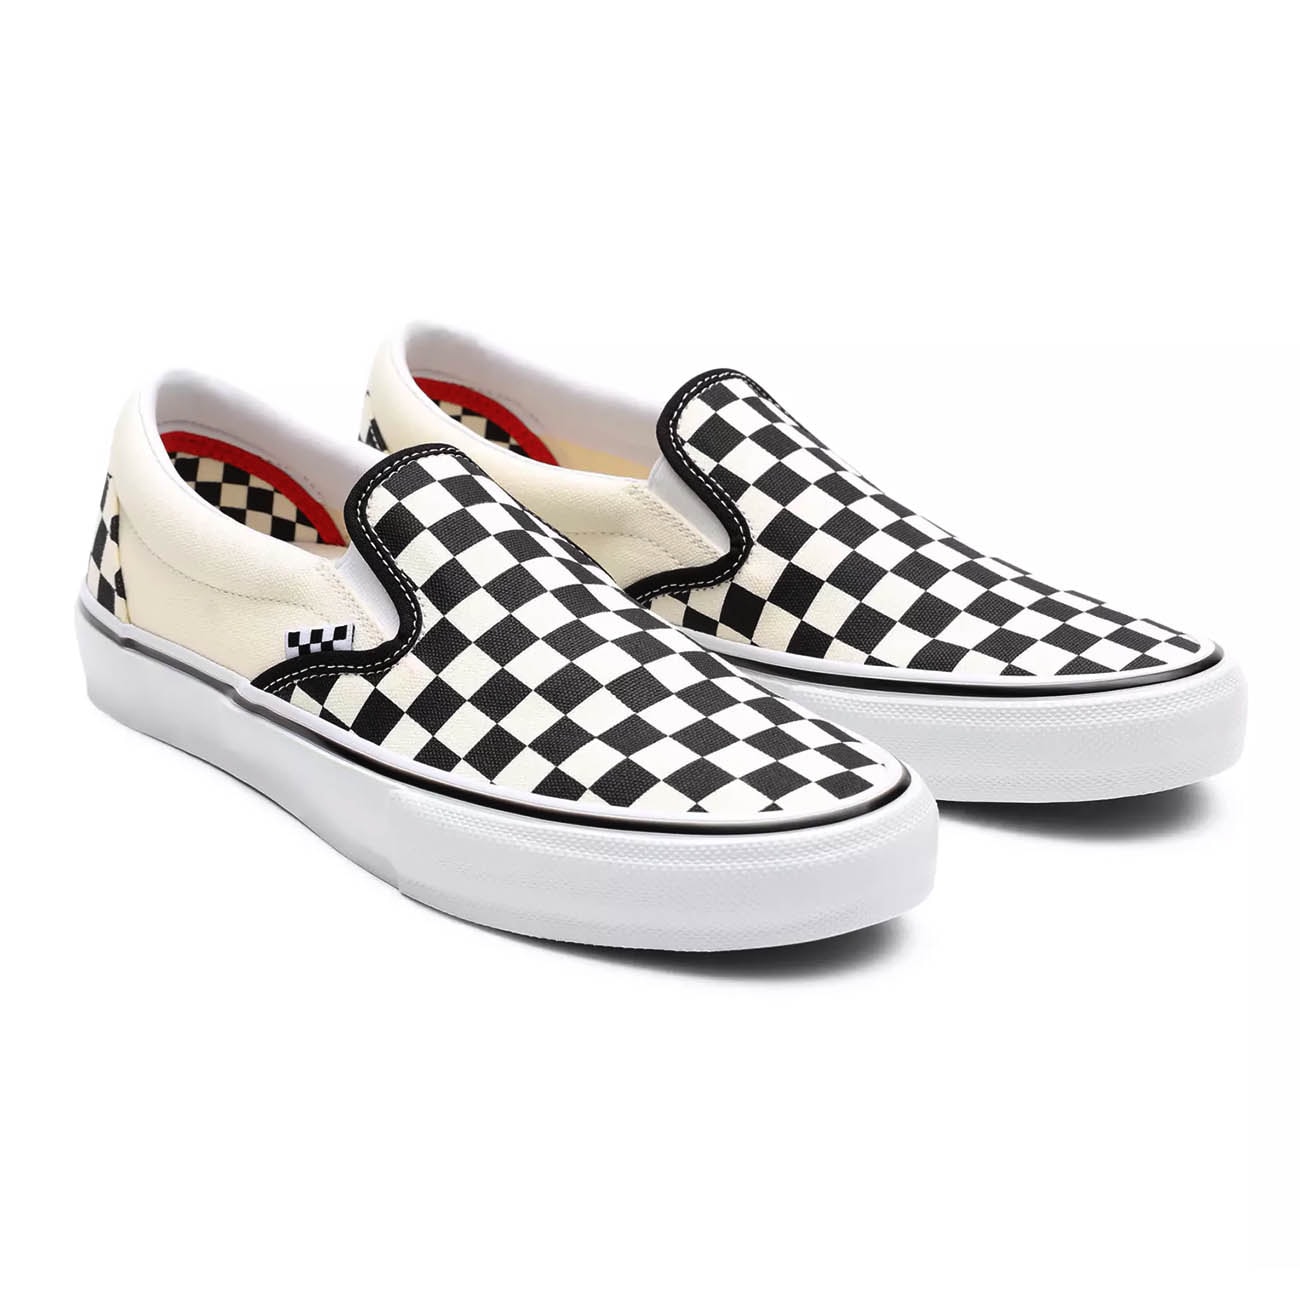 Checkerboard Skate Slip On Shoe Blk/Wht (size options listed)